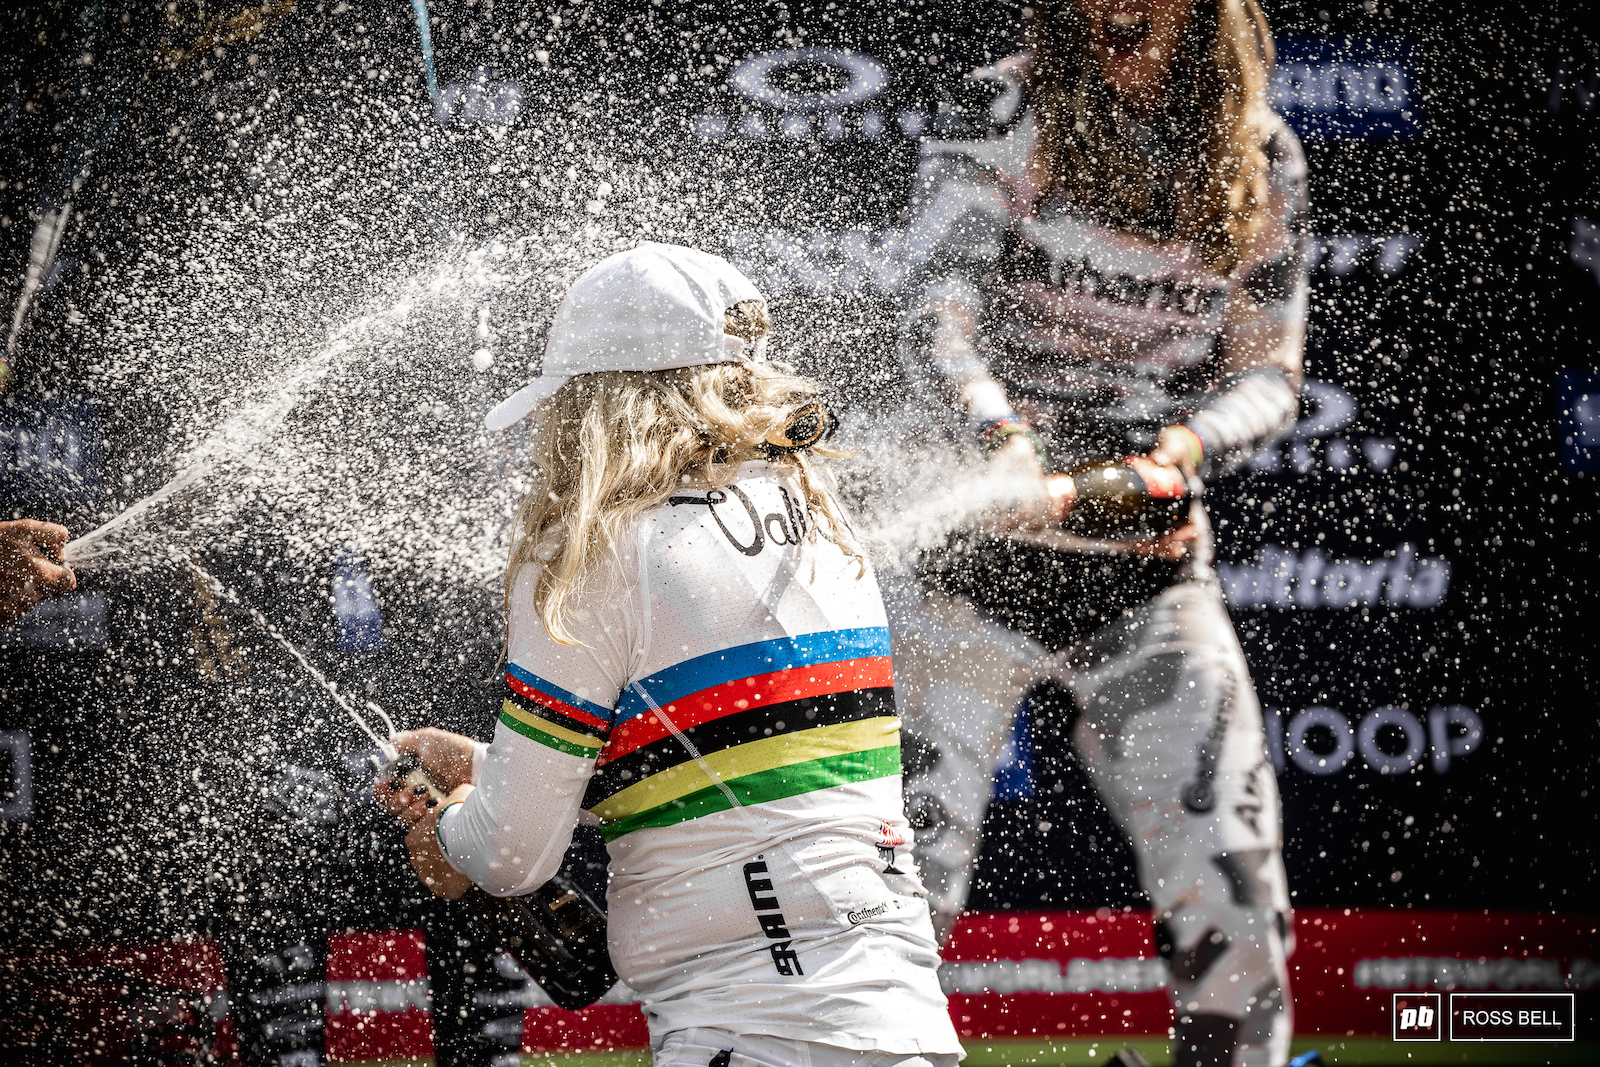 Vali H ll finally gets to spray the elite winners champagne in front of her friends family and fans.